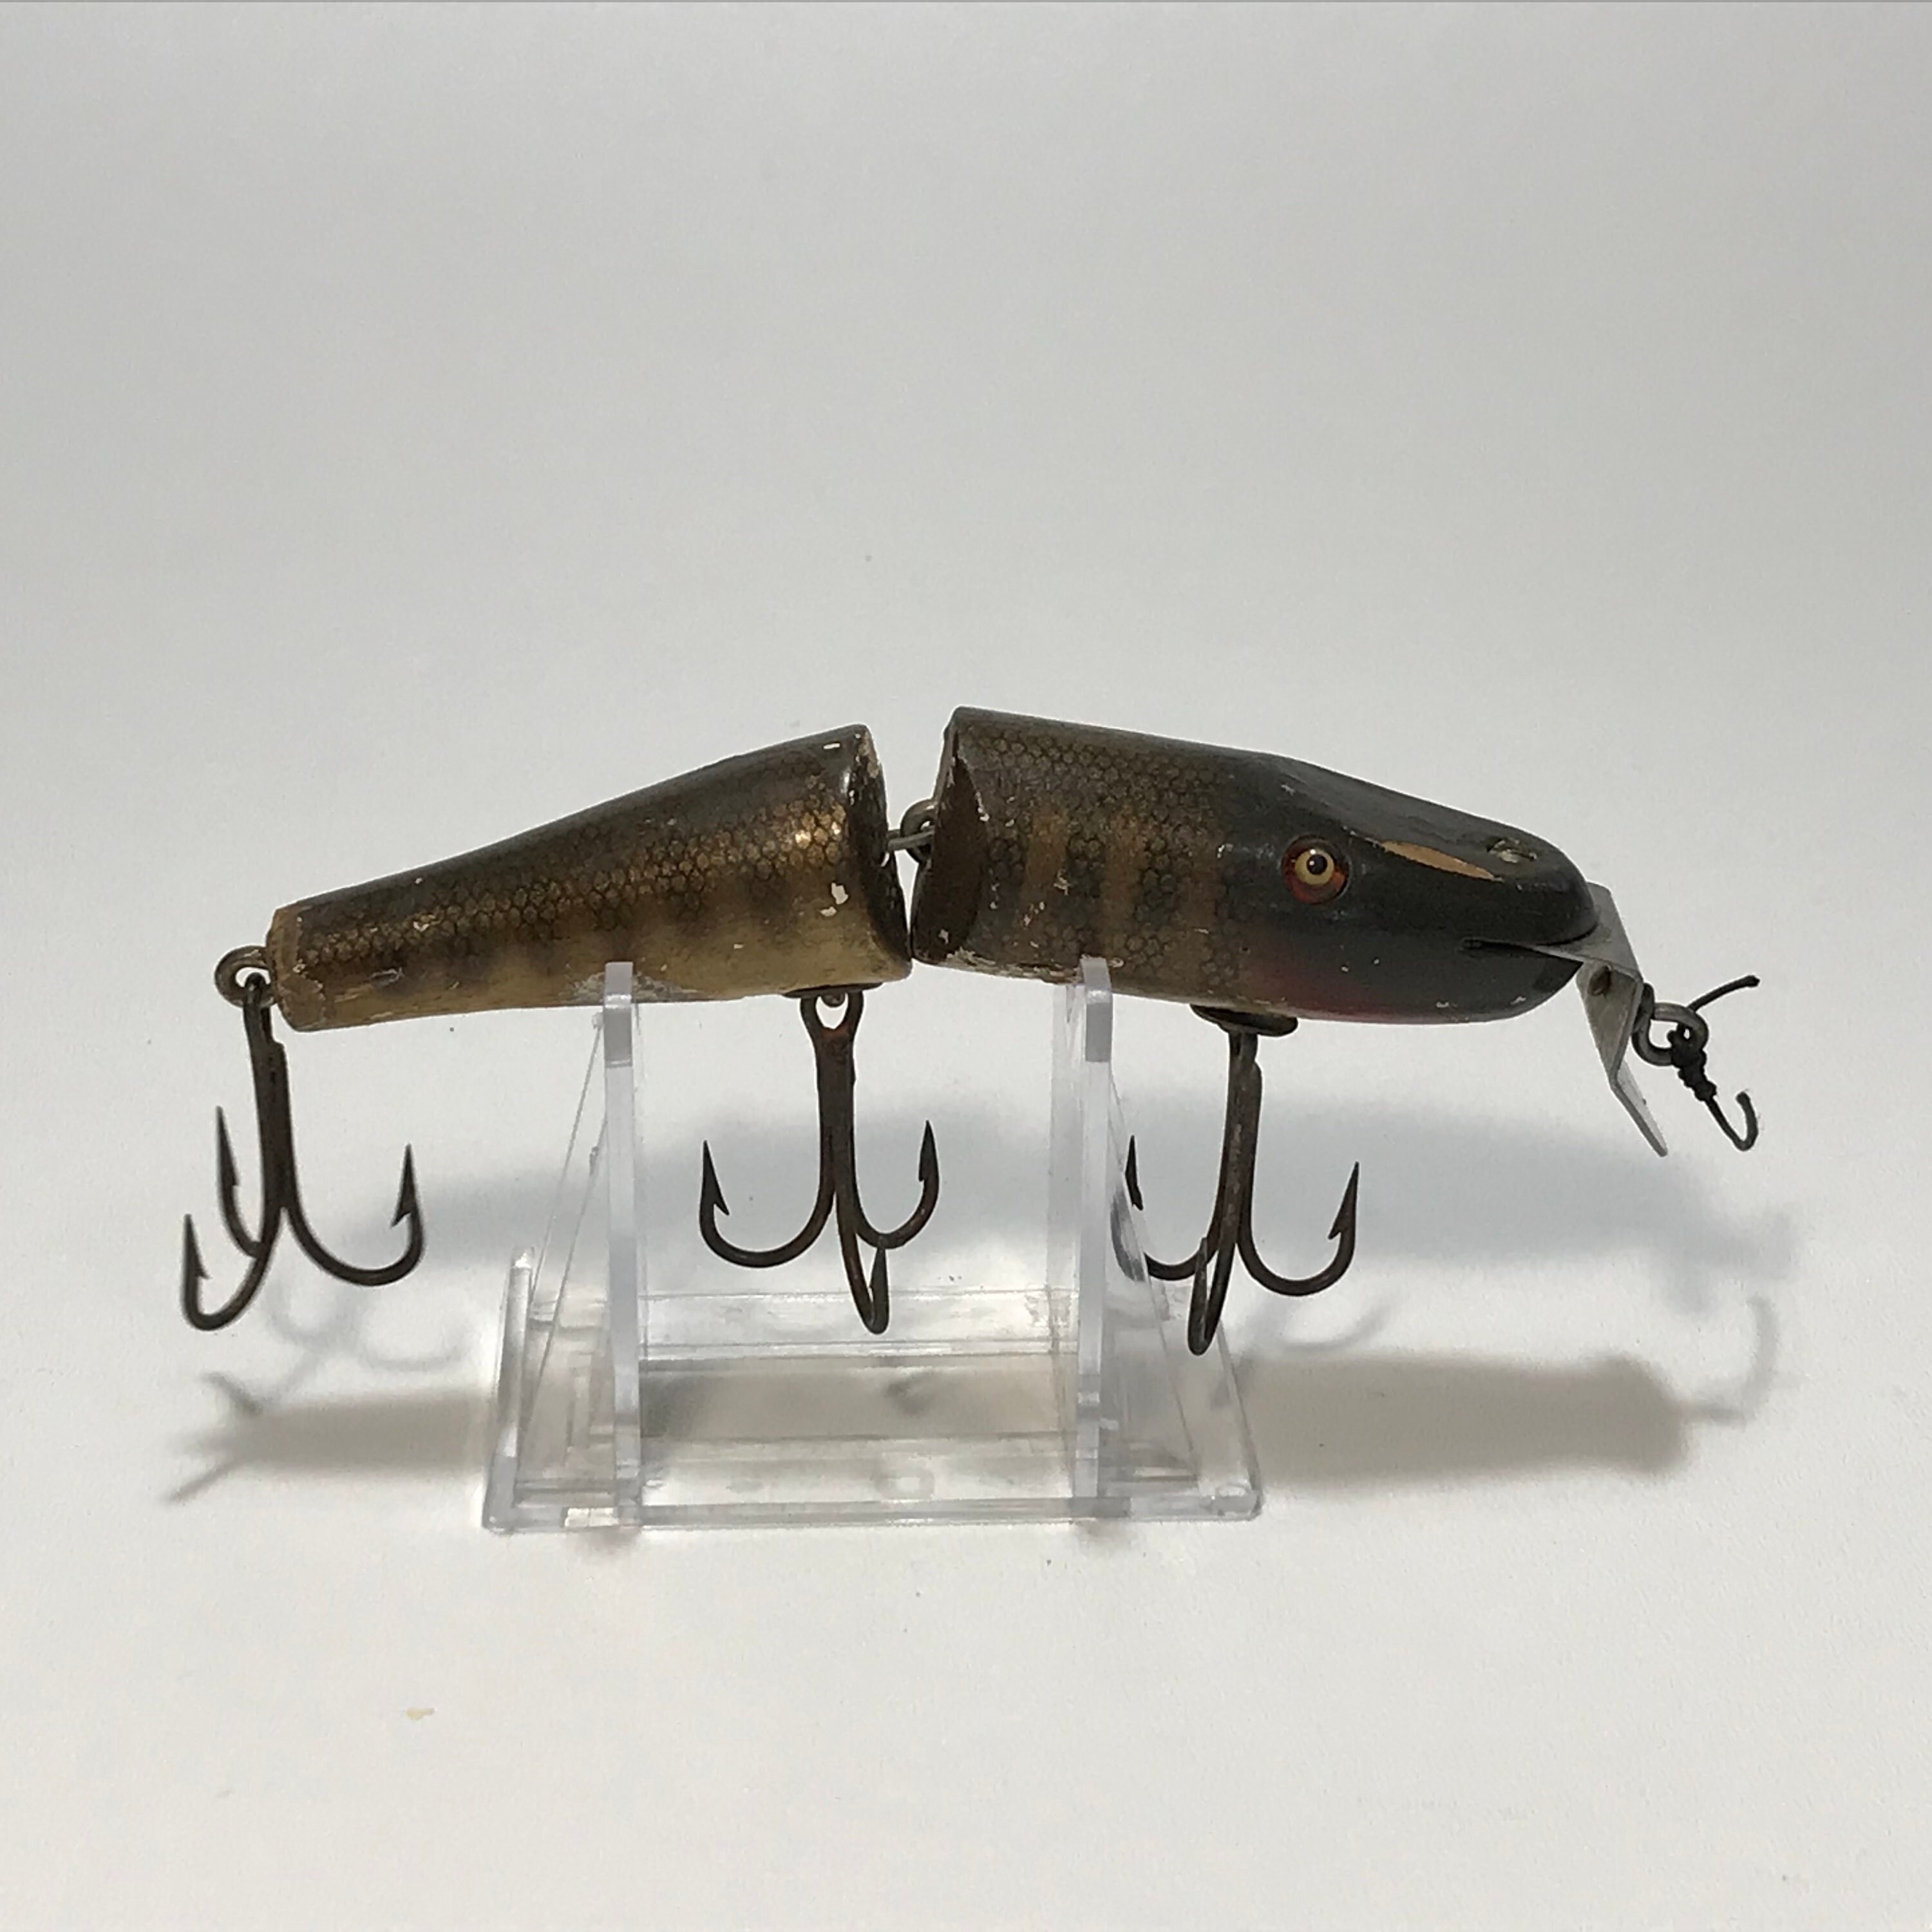 CCBC Antique/vintage Fishing Lure, Tackle, Gear, Crankbait, Minnow Topwater  Jerk Spinning Bait Old Anglers Bass Pike Perch Classic Fishhook -   Denmark